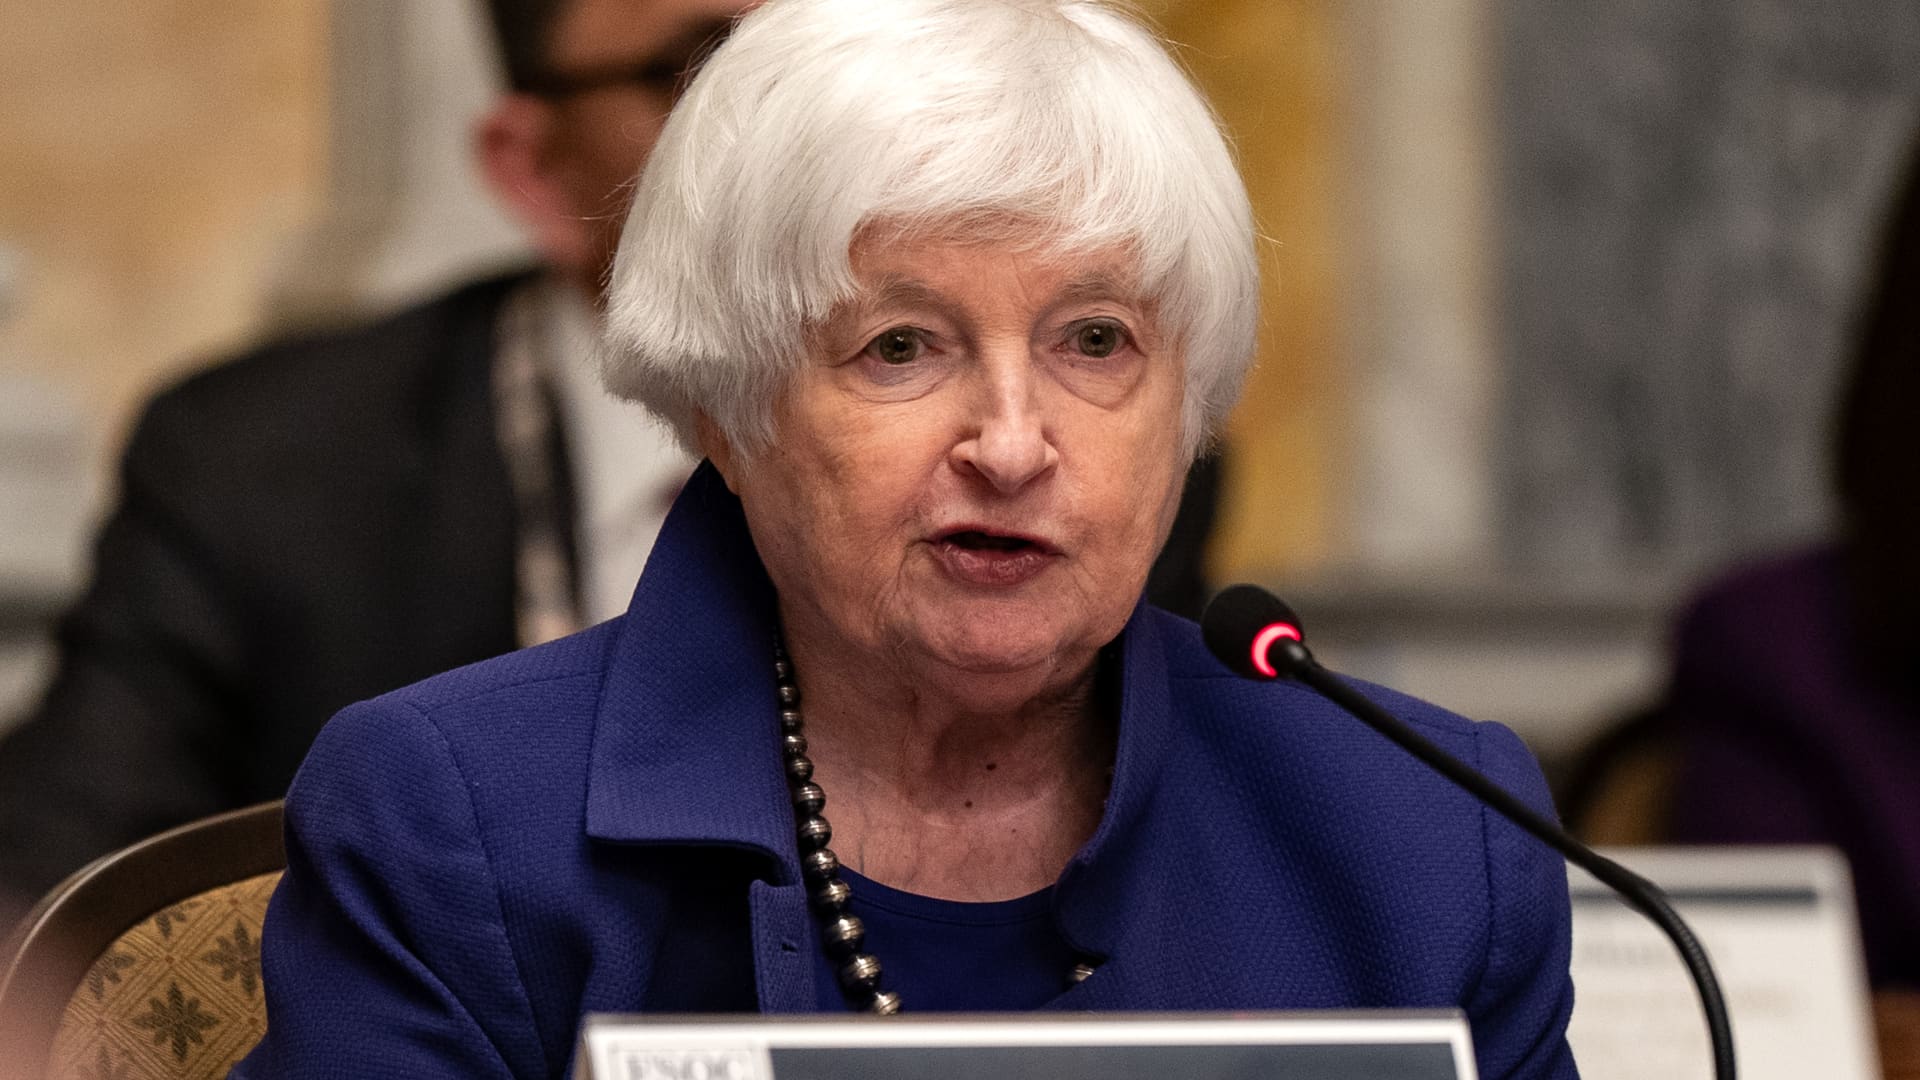 European banks in Russia face ‘awful lot of risk’, Yellen says